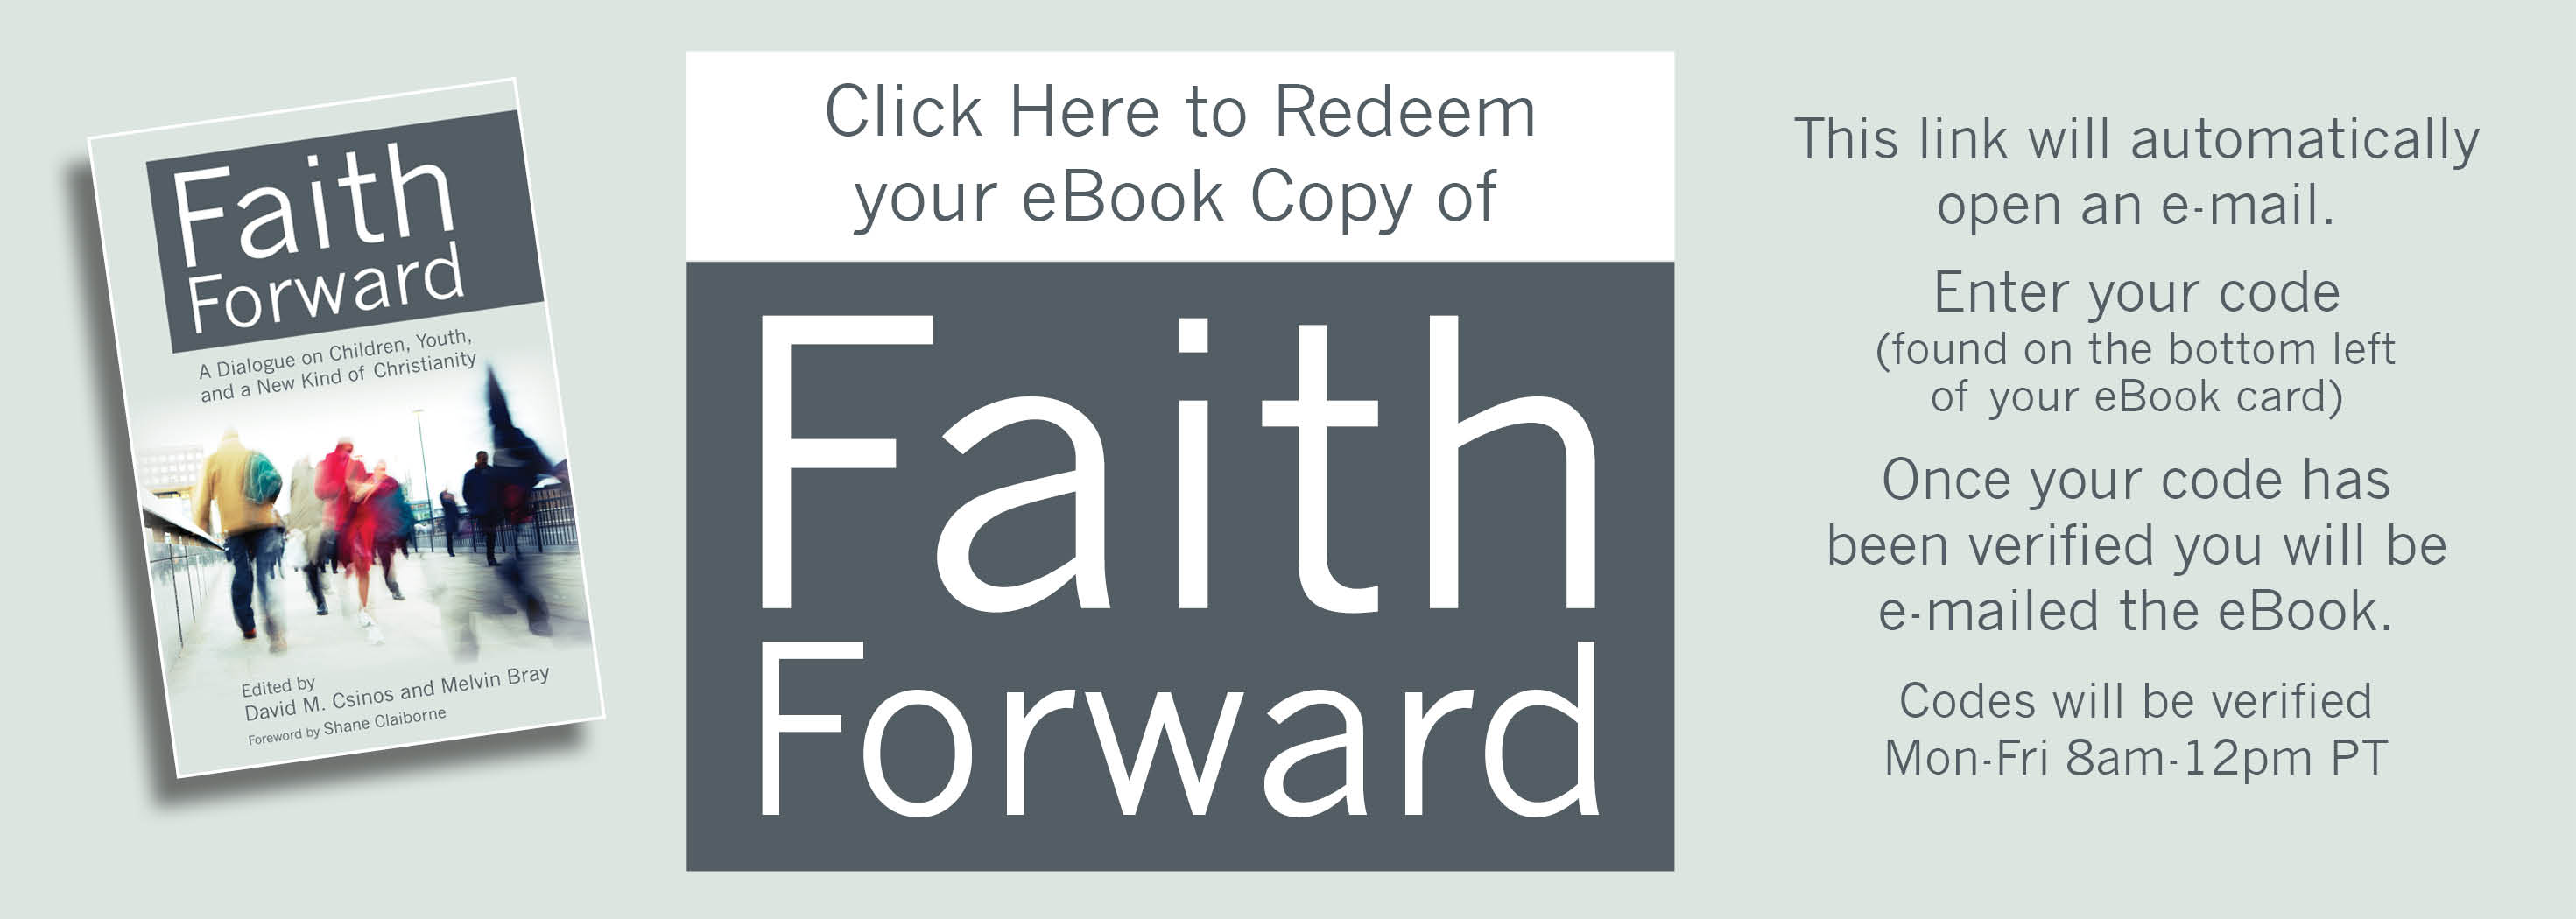 Click here to receive your pre-purchased eBook